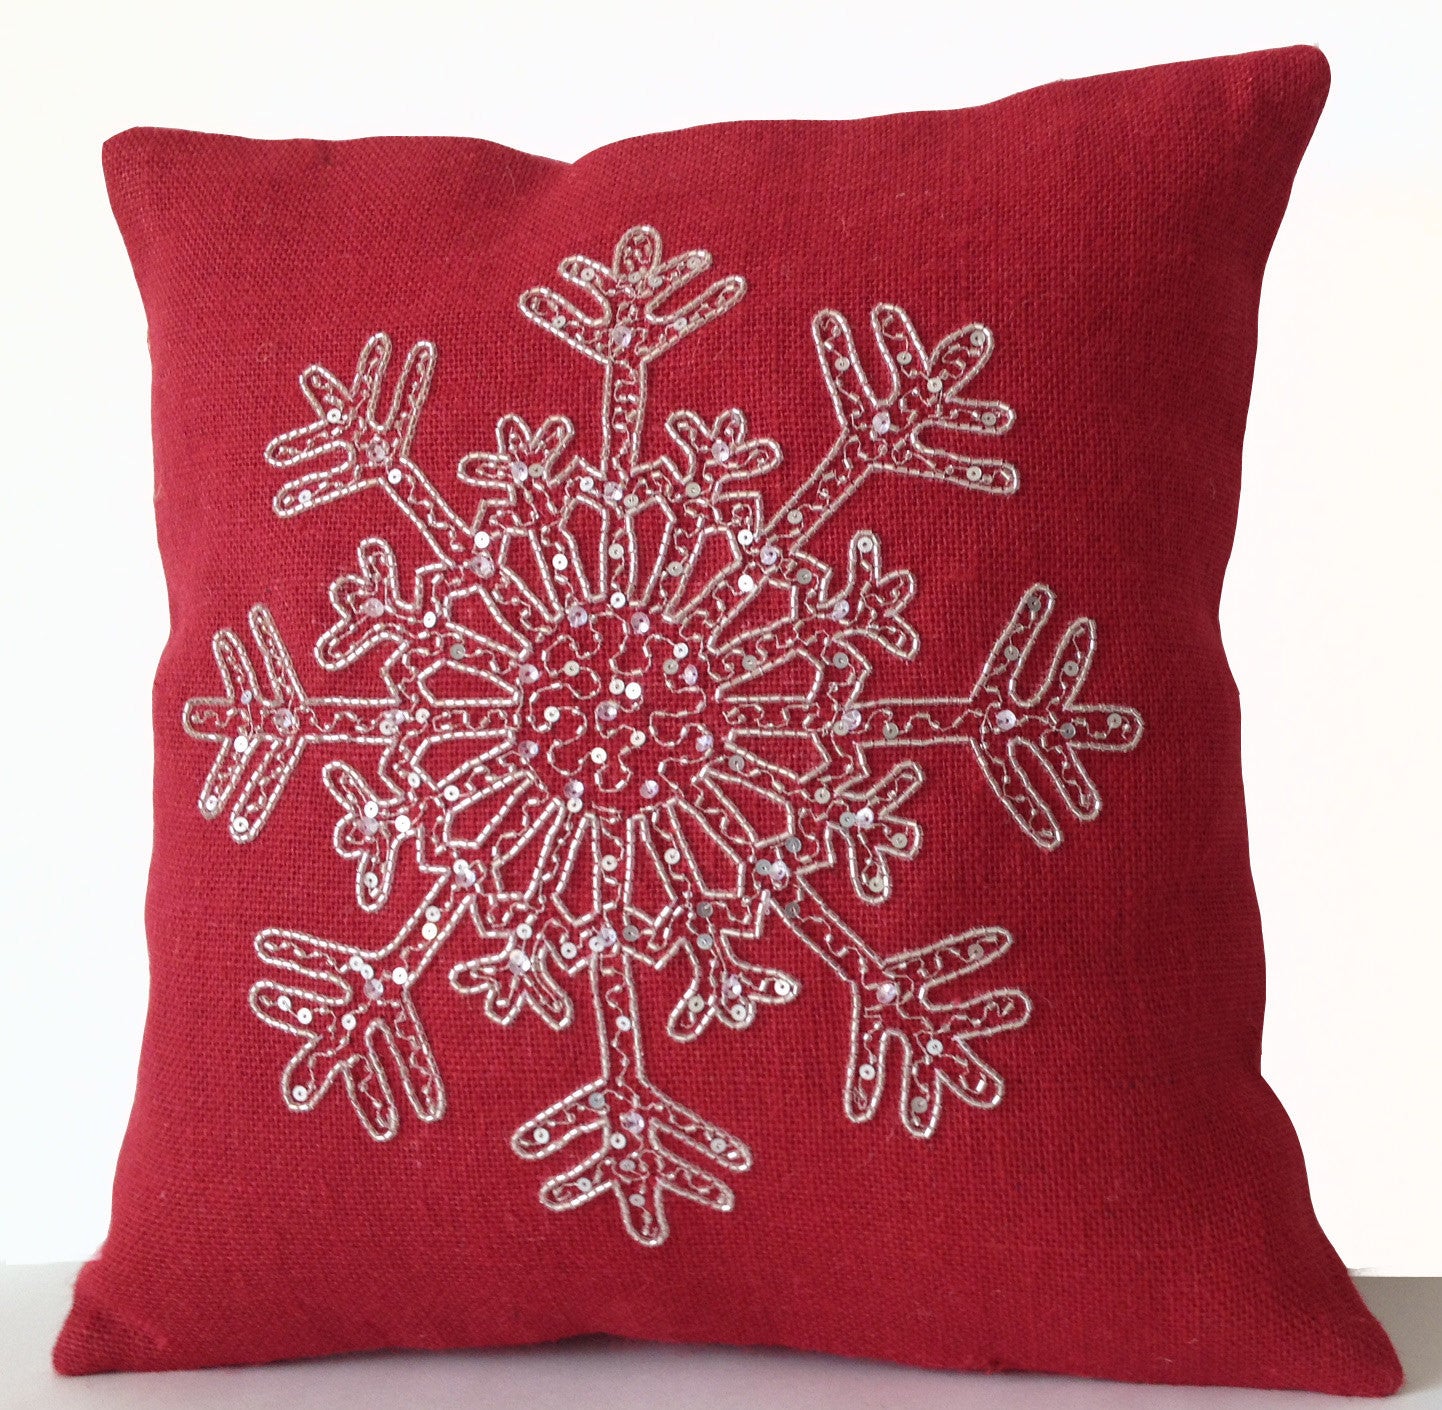 Red handmade pillow covers sofa pillow covers throw pillow covers cushion  covers